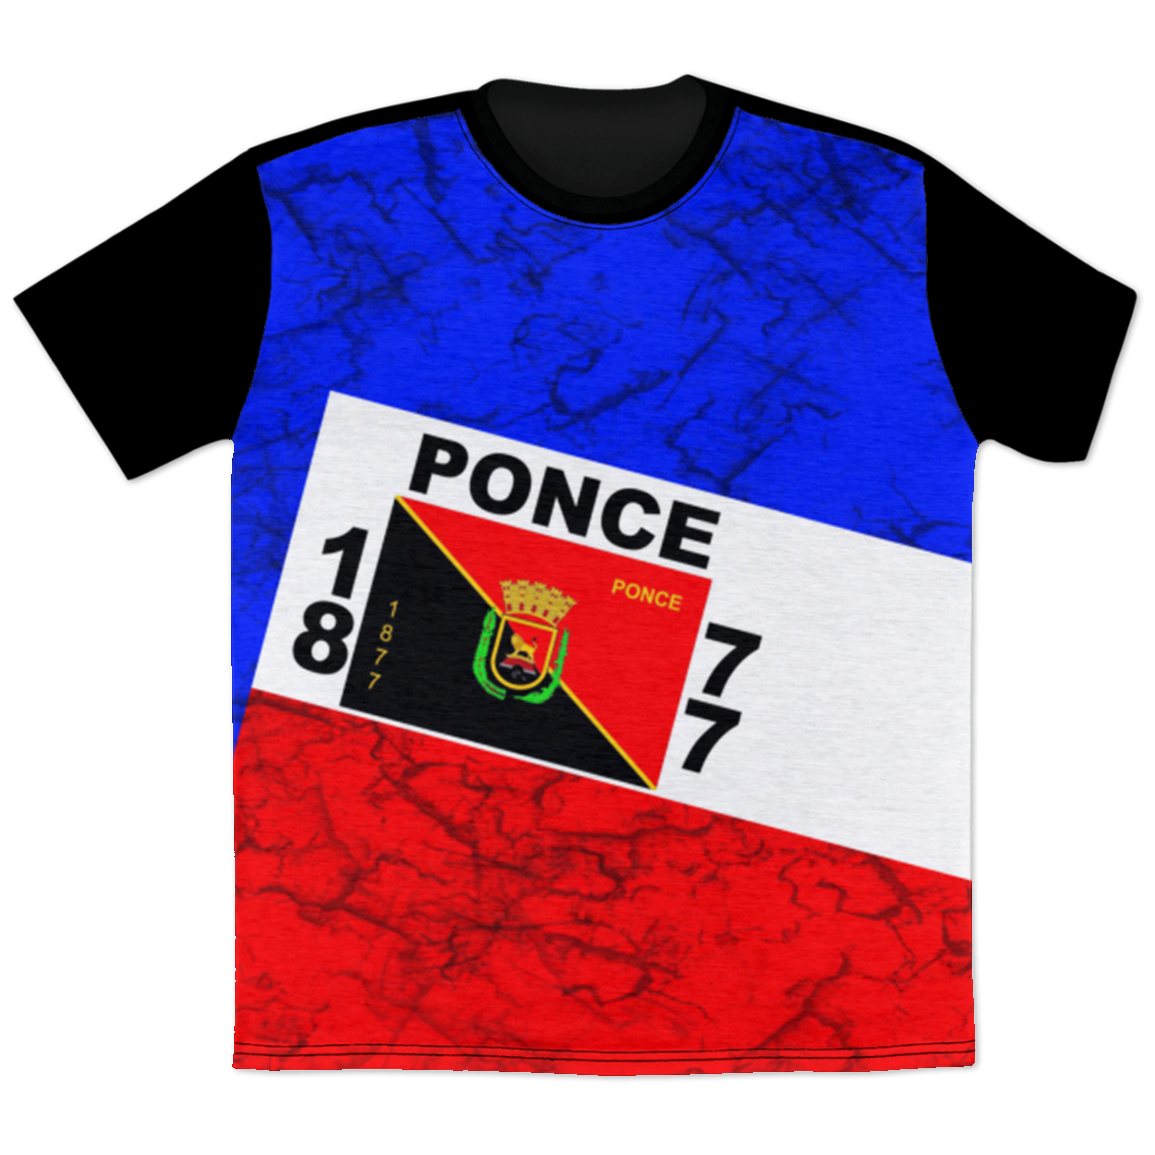 Ponce T-Shirt - Puerto Rican Pride